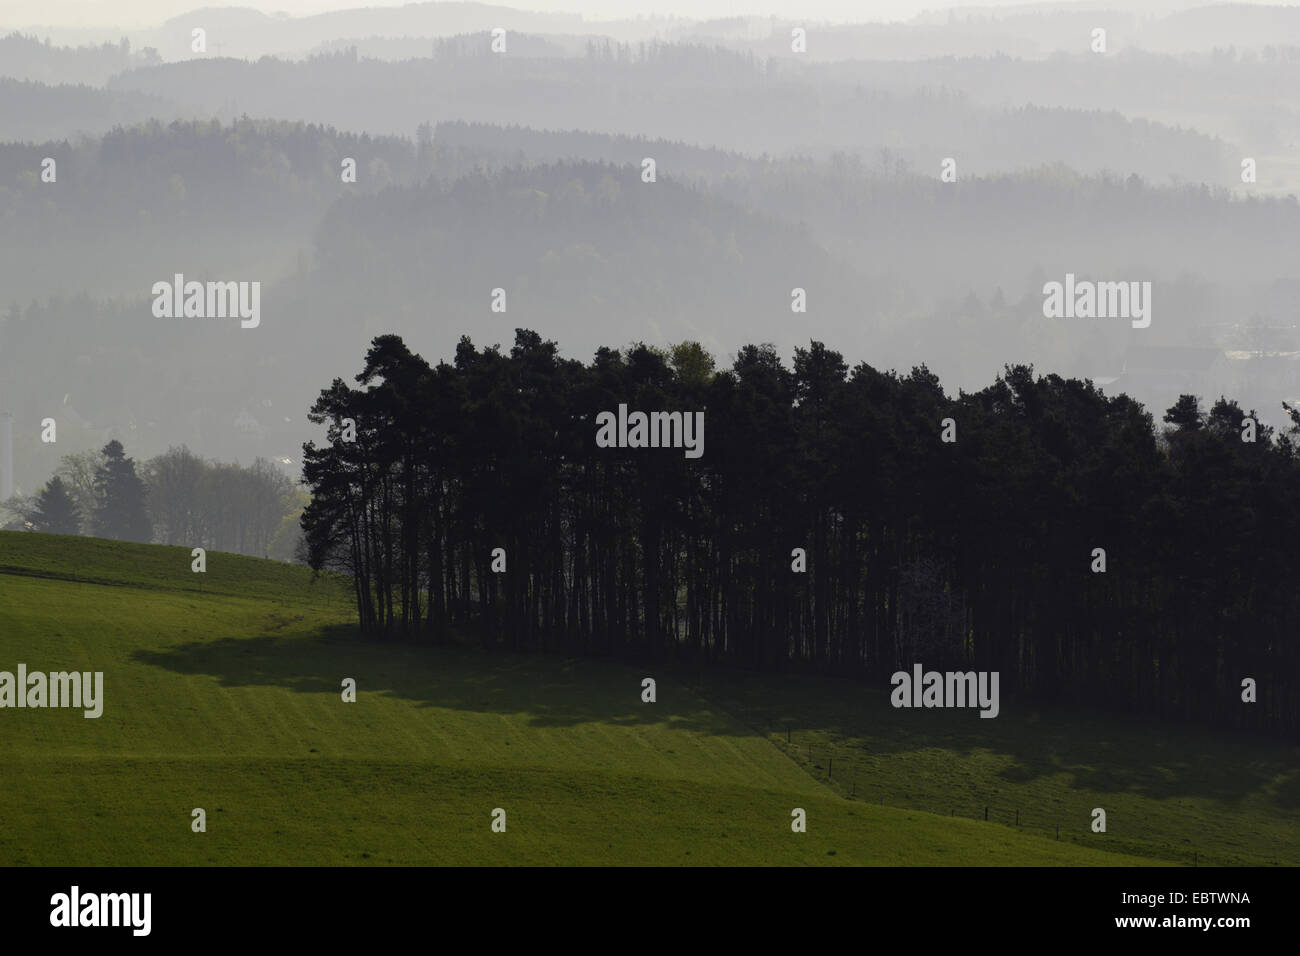 clearing morning mist over hilly landscape with forests and meadows, Germany, Saxony, Vogtland Stock Photo